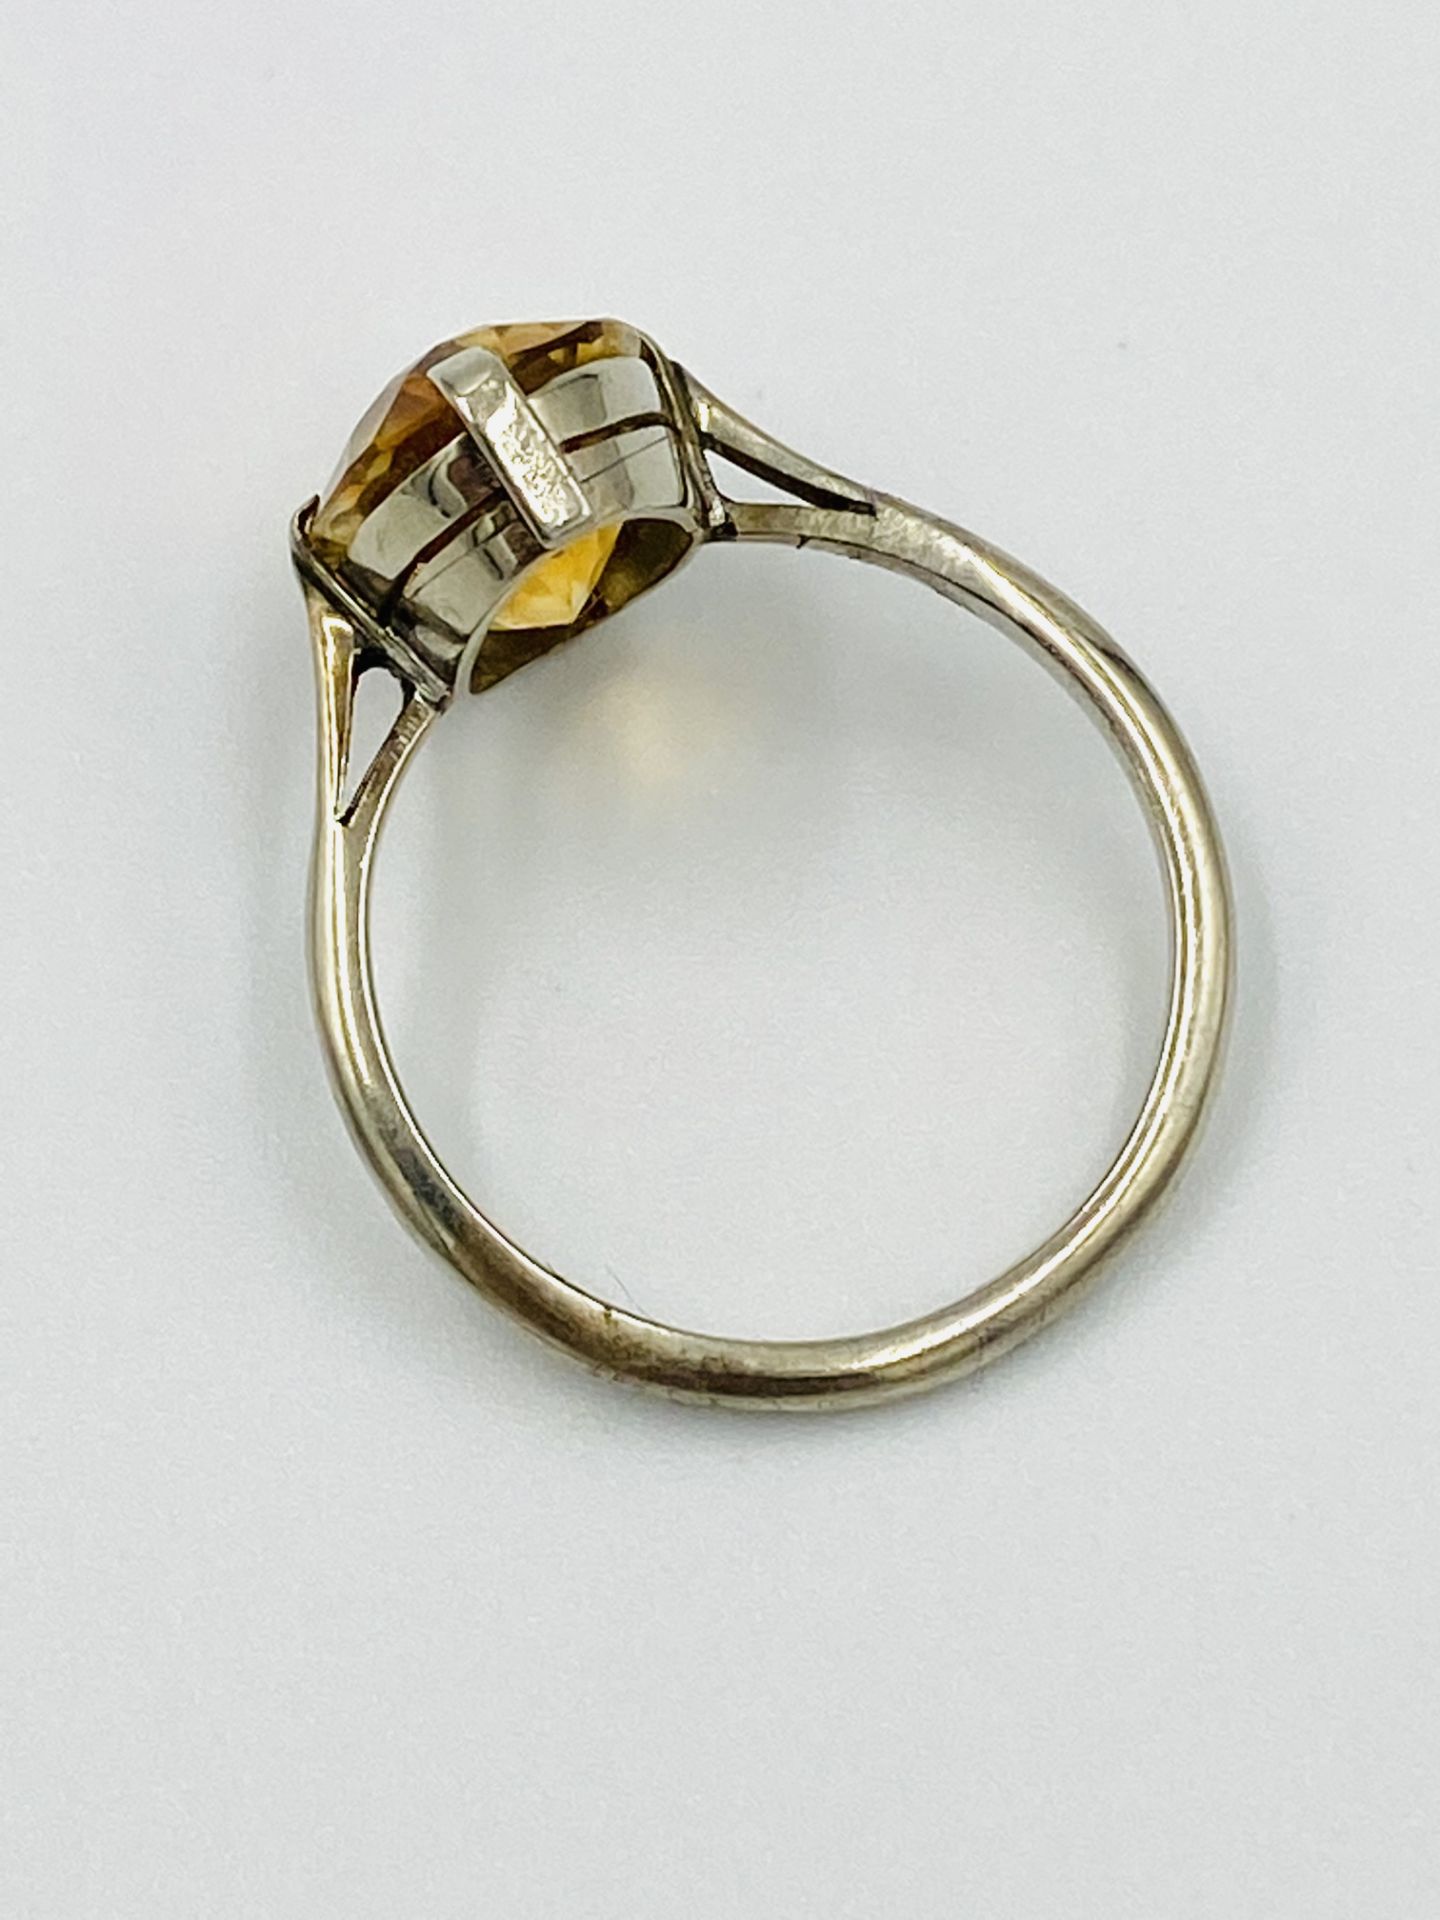 9ct gold ring set with a cognac citrine - Image 4 of 5